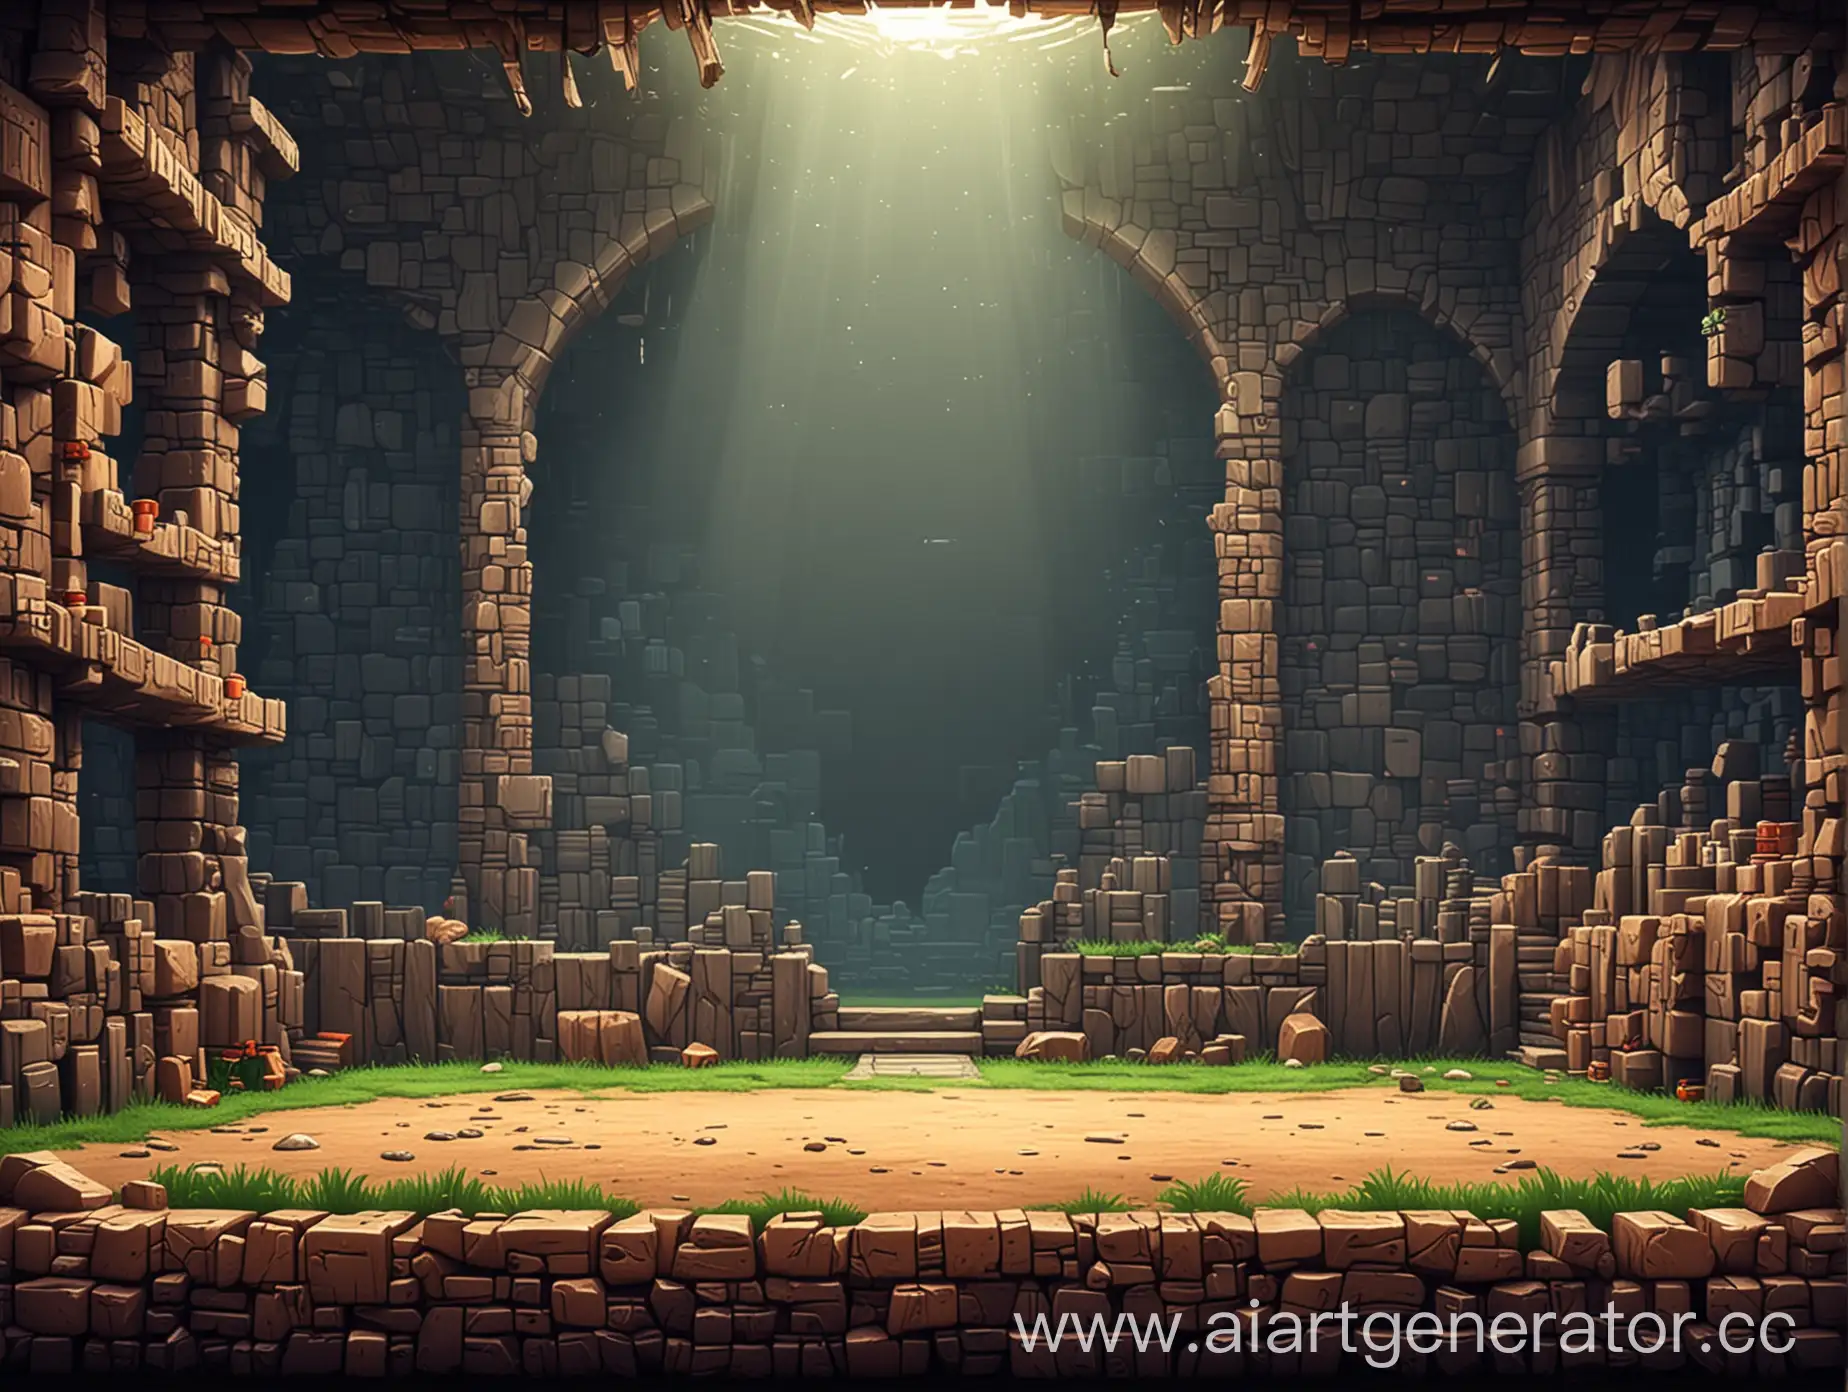 Vibrant-Pixel-Art-Arena-Background-for-Gaming-Enthusiasts